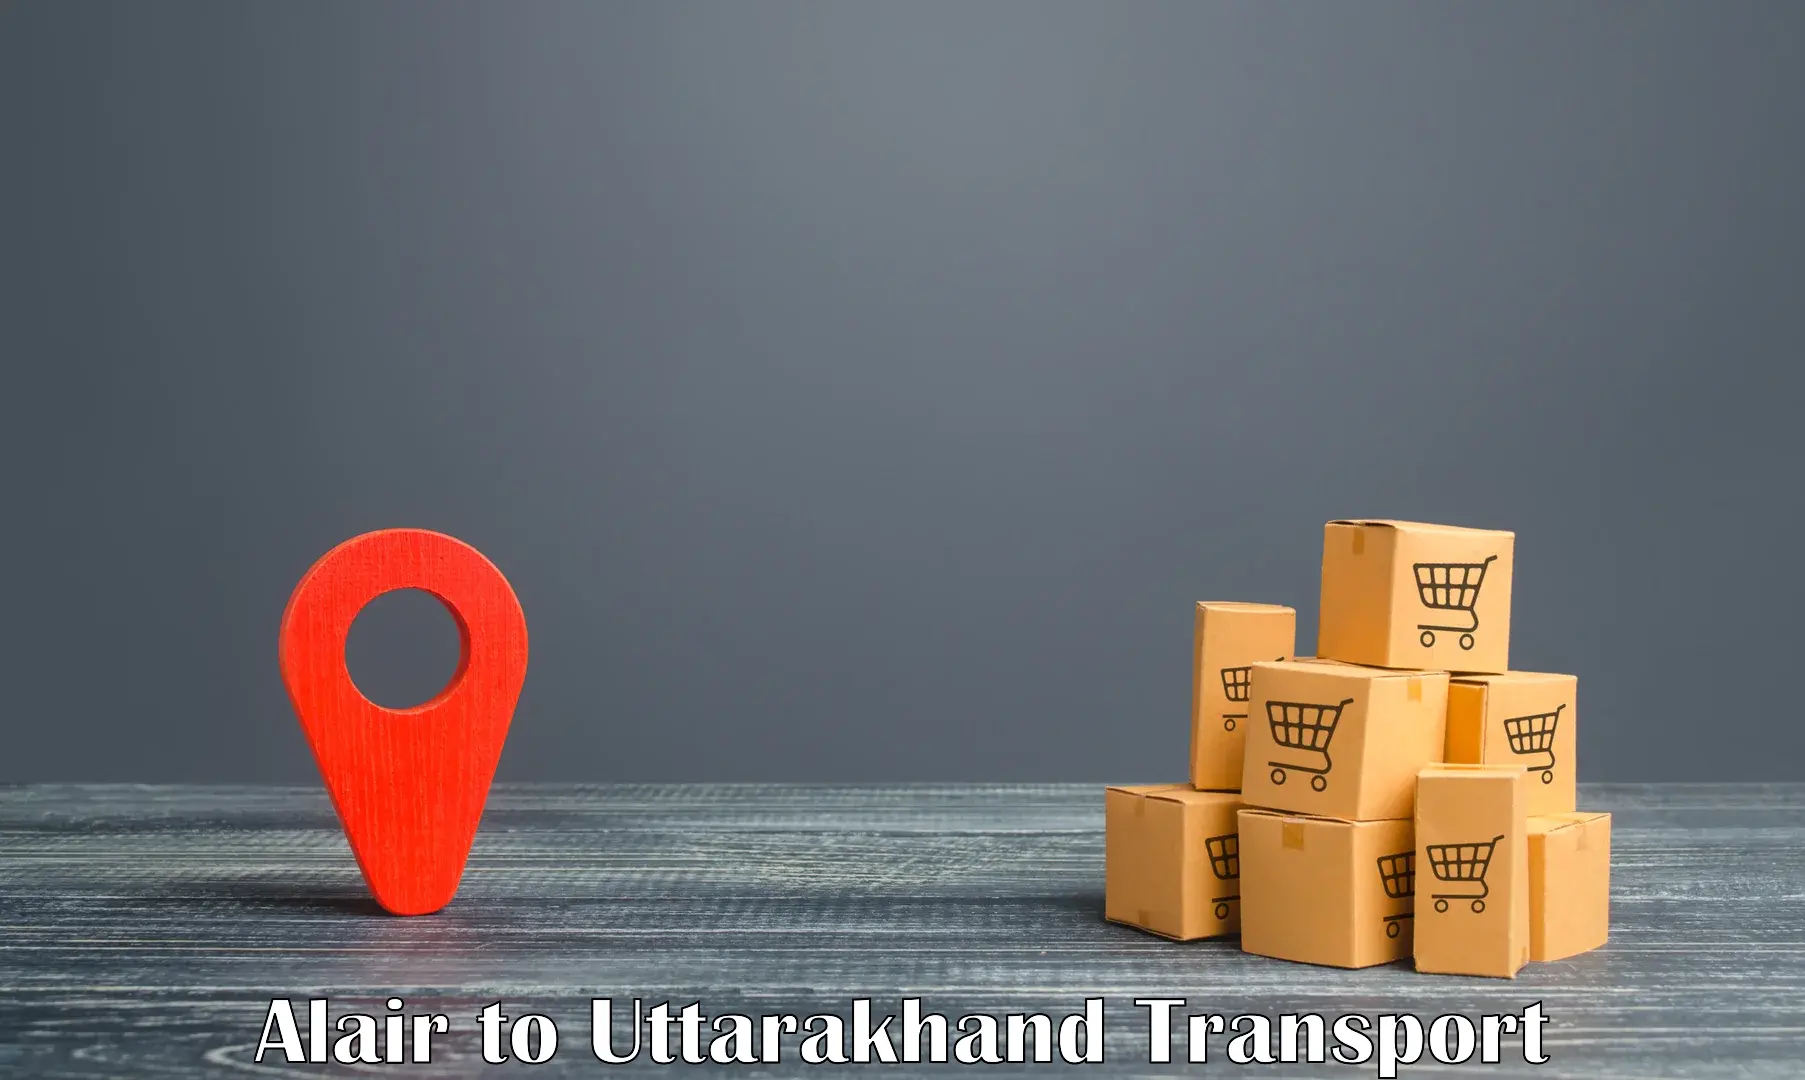 Daily parcel service transport Alair to Rishikesh